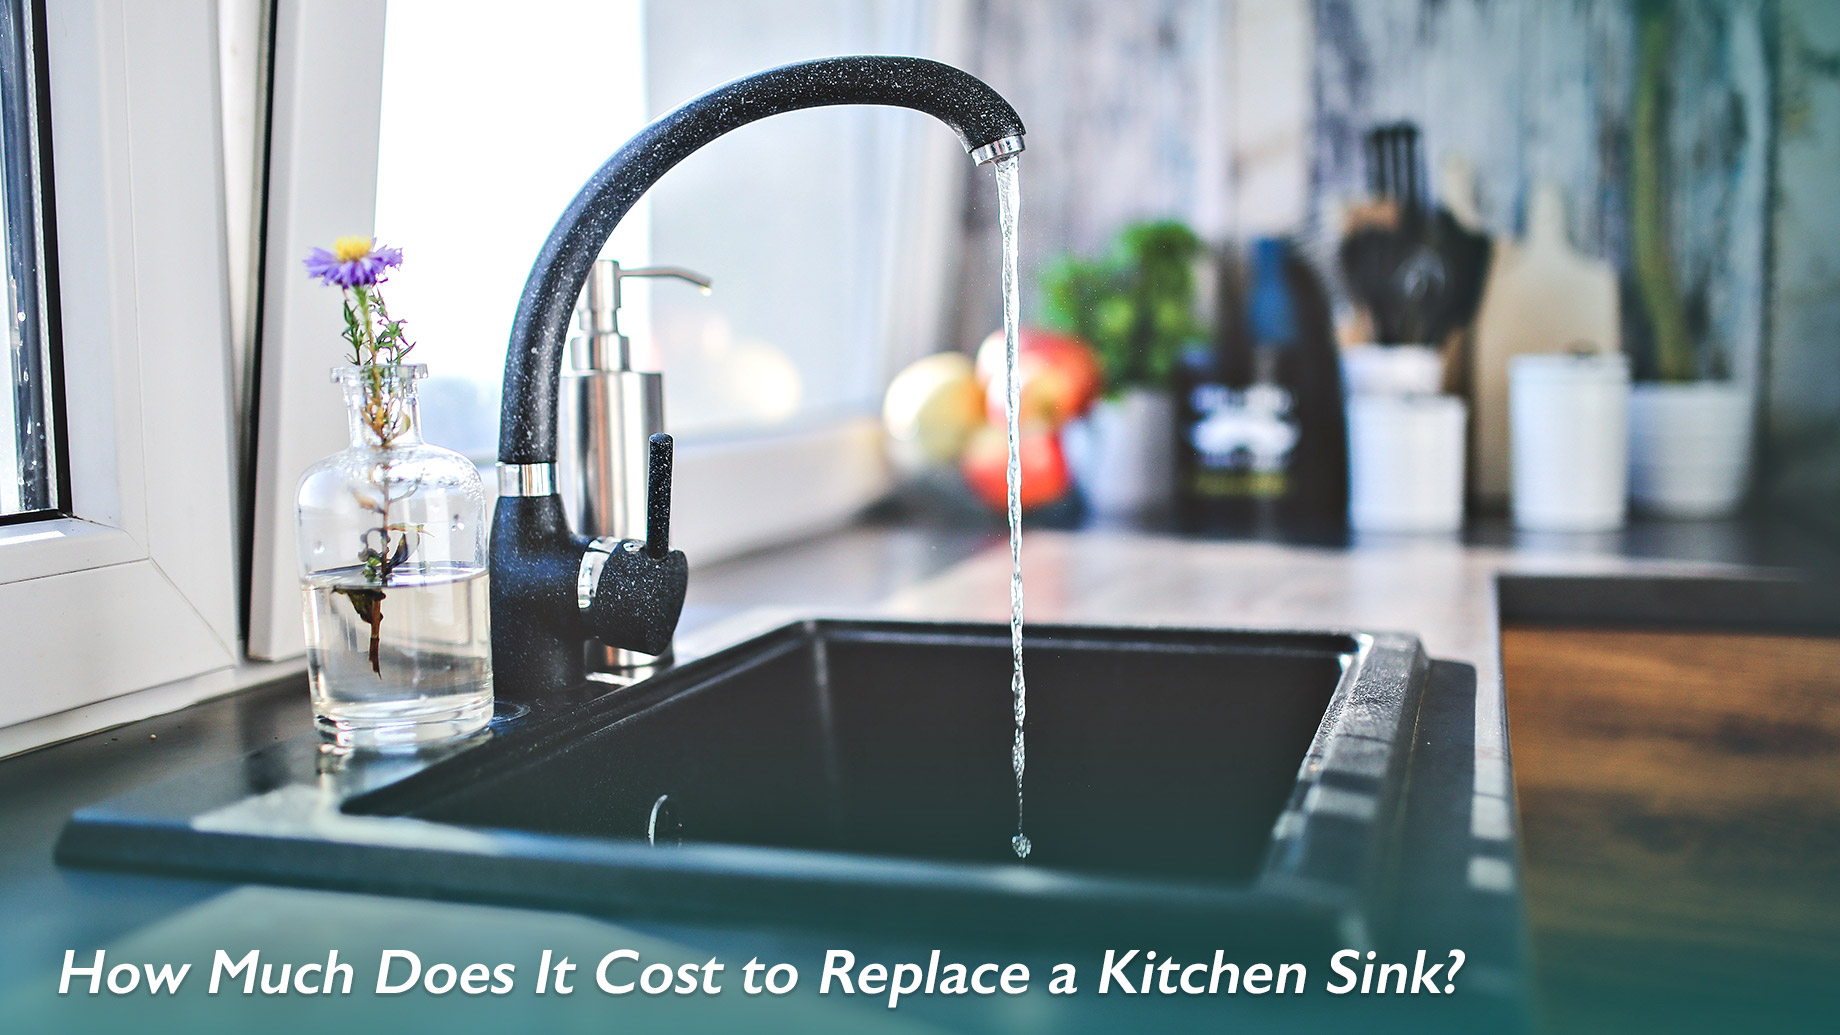 How Much Does It Cost to Replace a Kitchen Sink A Price Guide ...